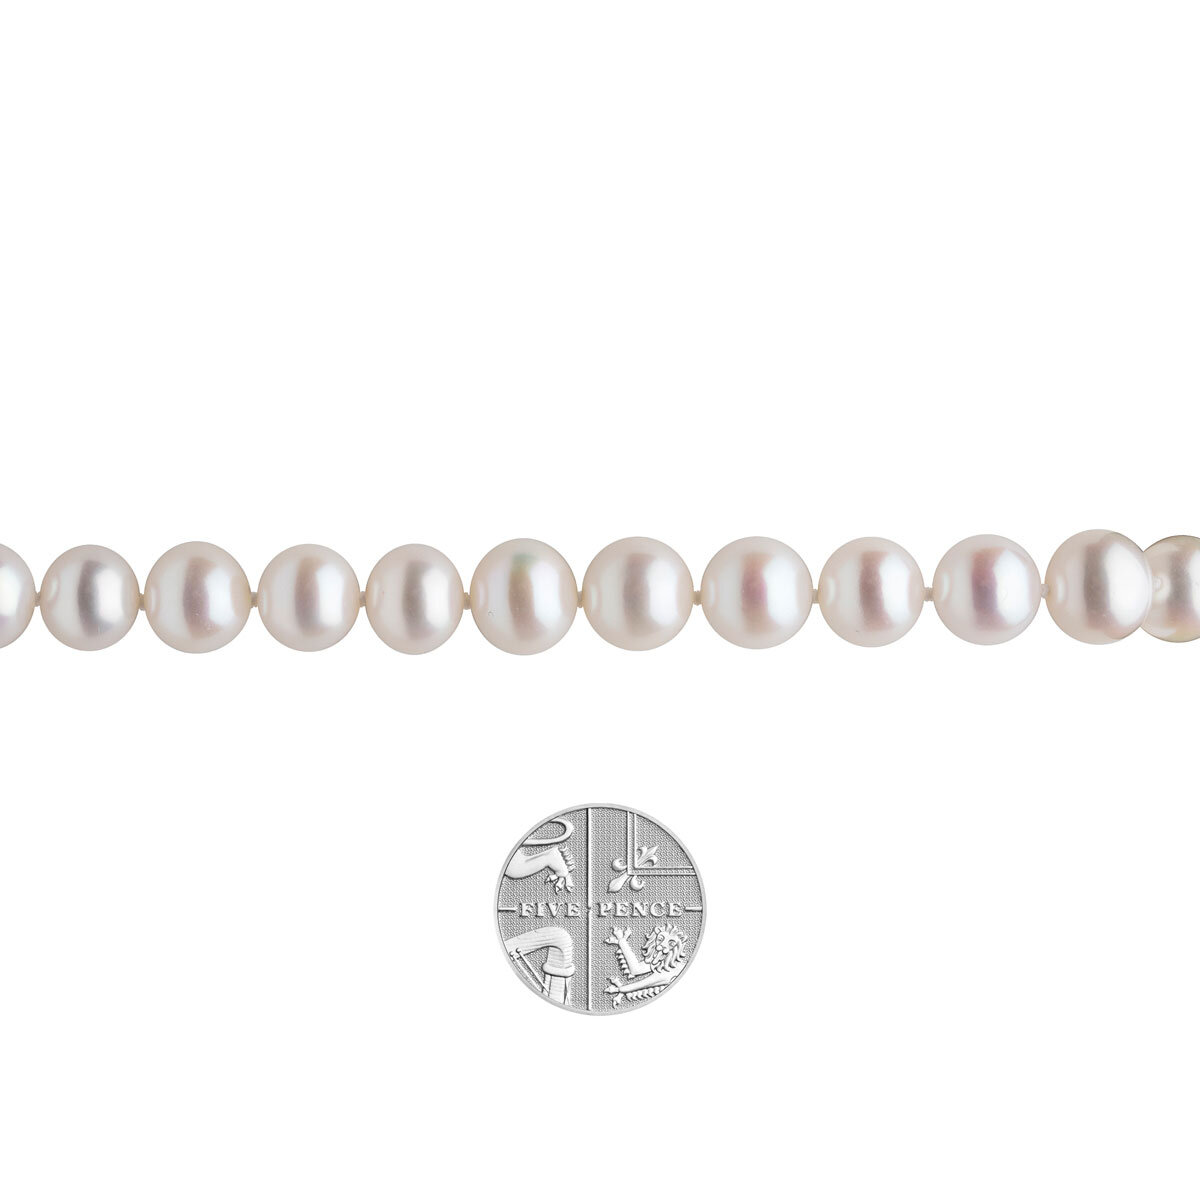 9-9.5mm Cultured Freshwater White Pearl Bracelet, 18ct White Gold